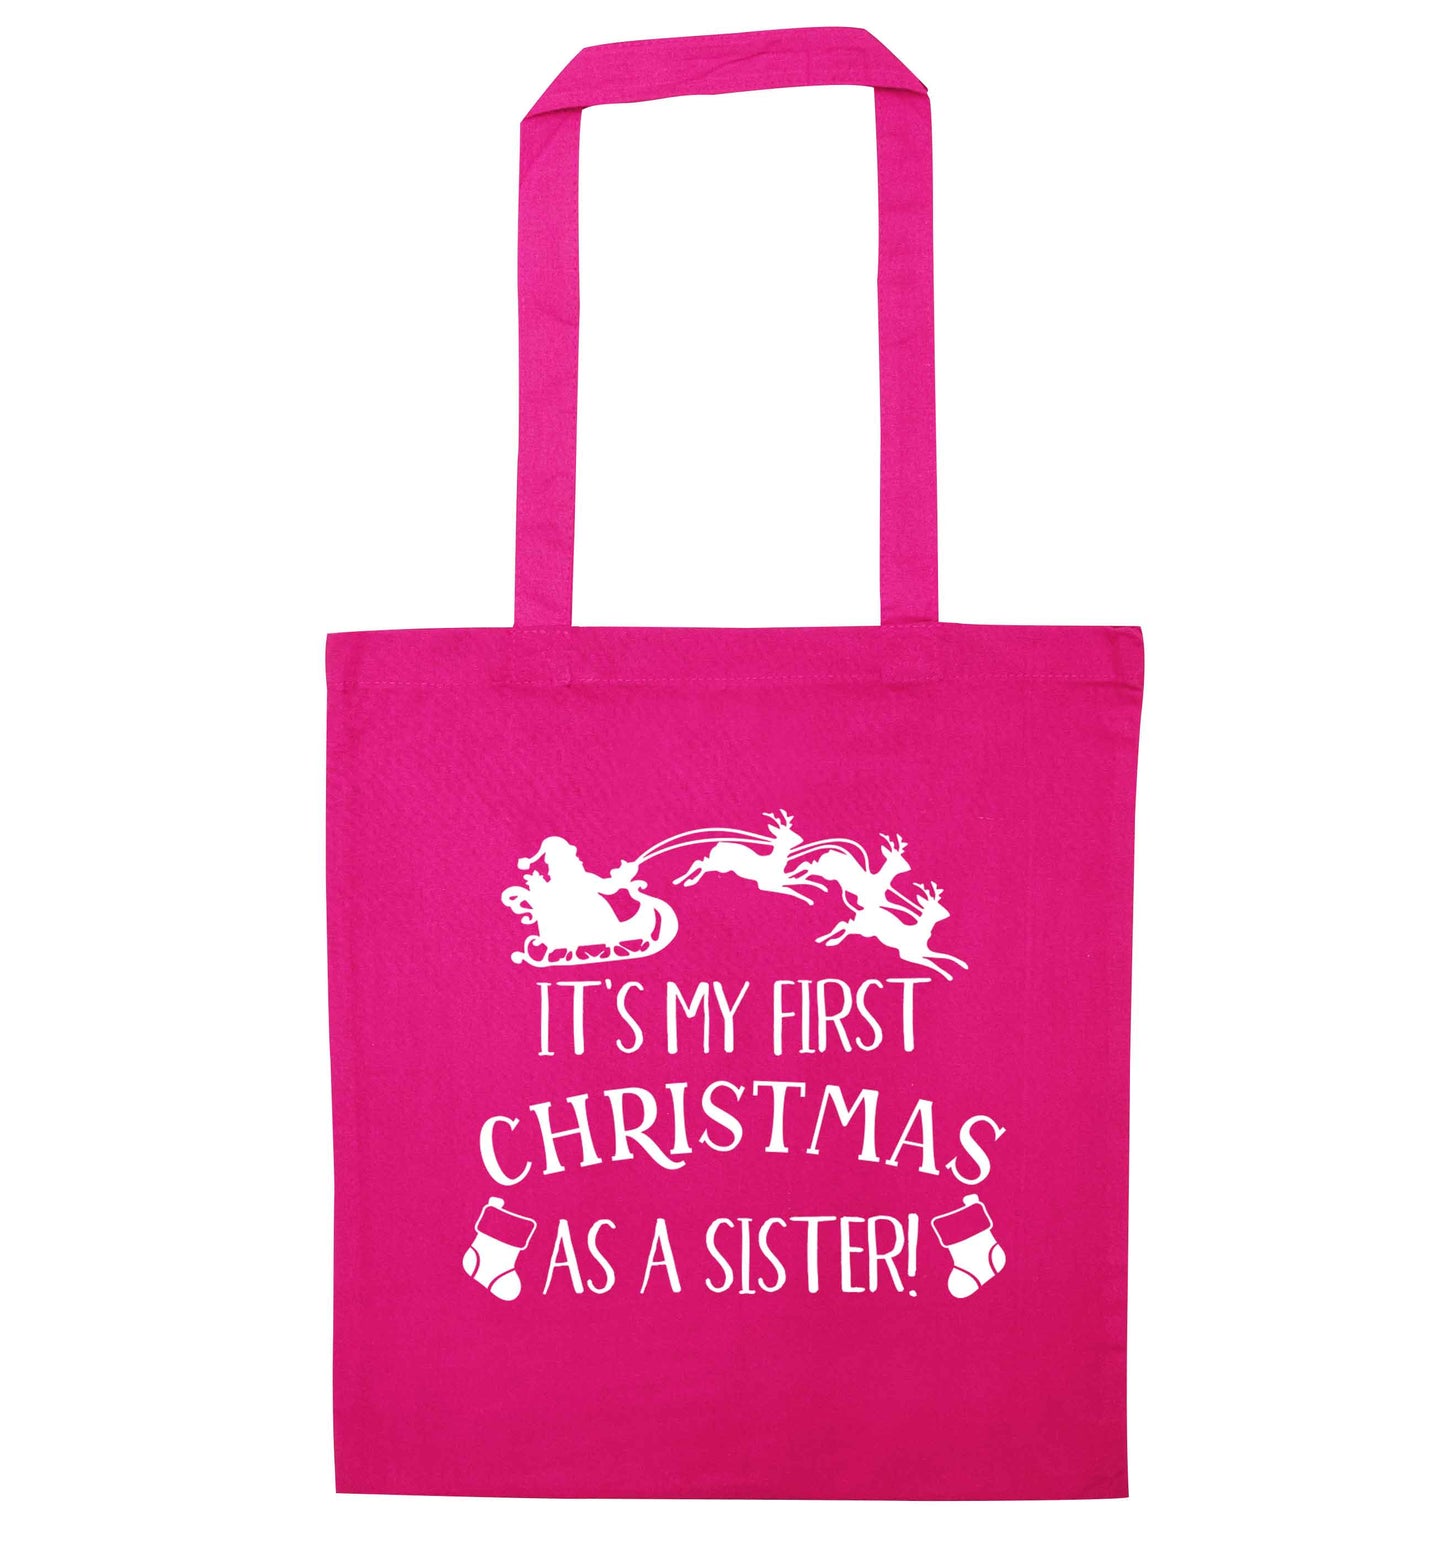 It's my first Christmas as a sister! pink tote bag